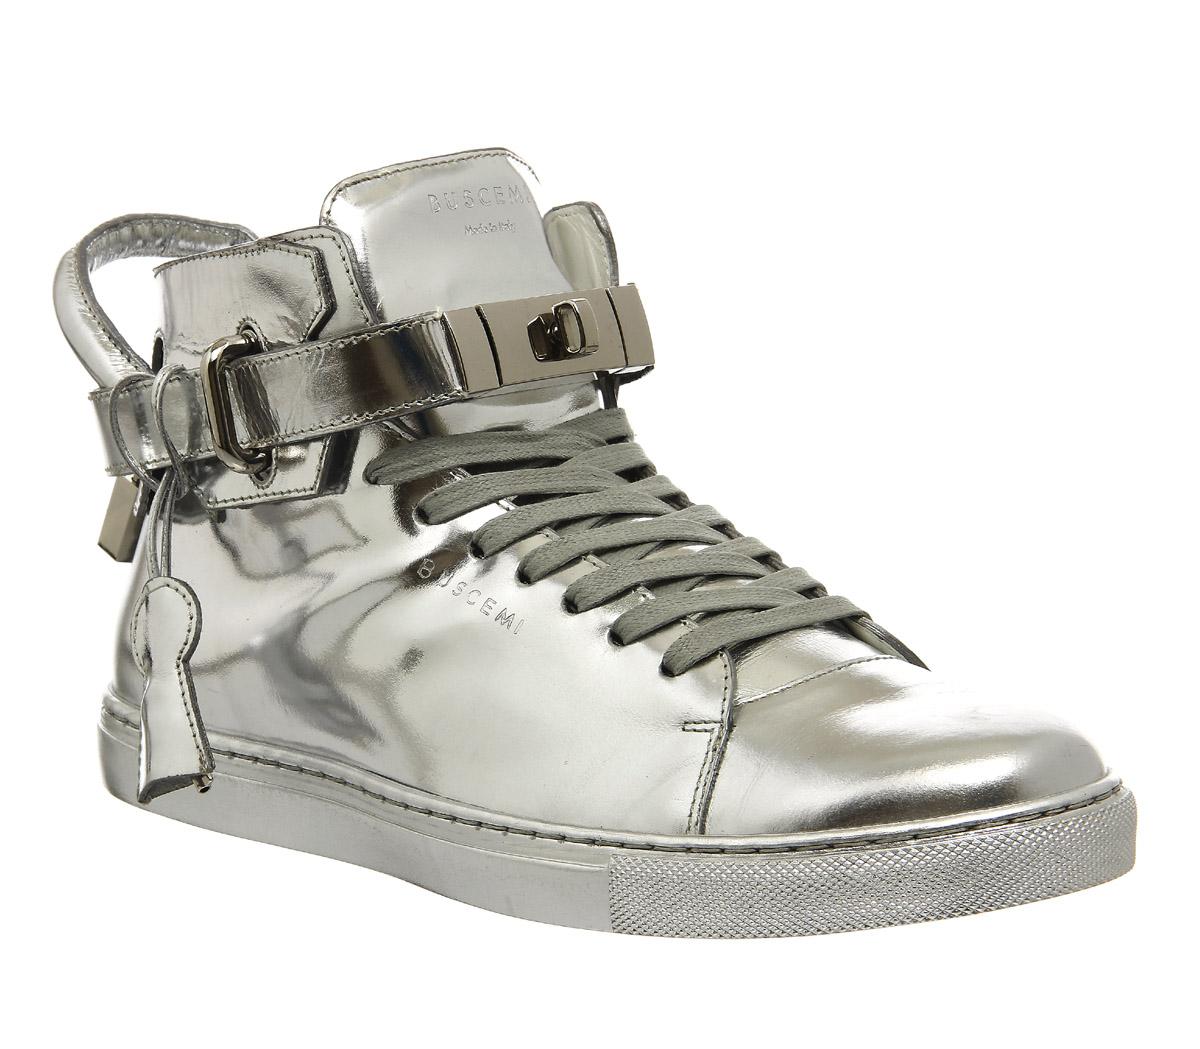 Buscemi 100mm ShoesSilver Metallic Leather